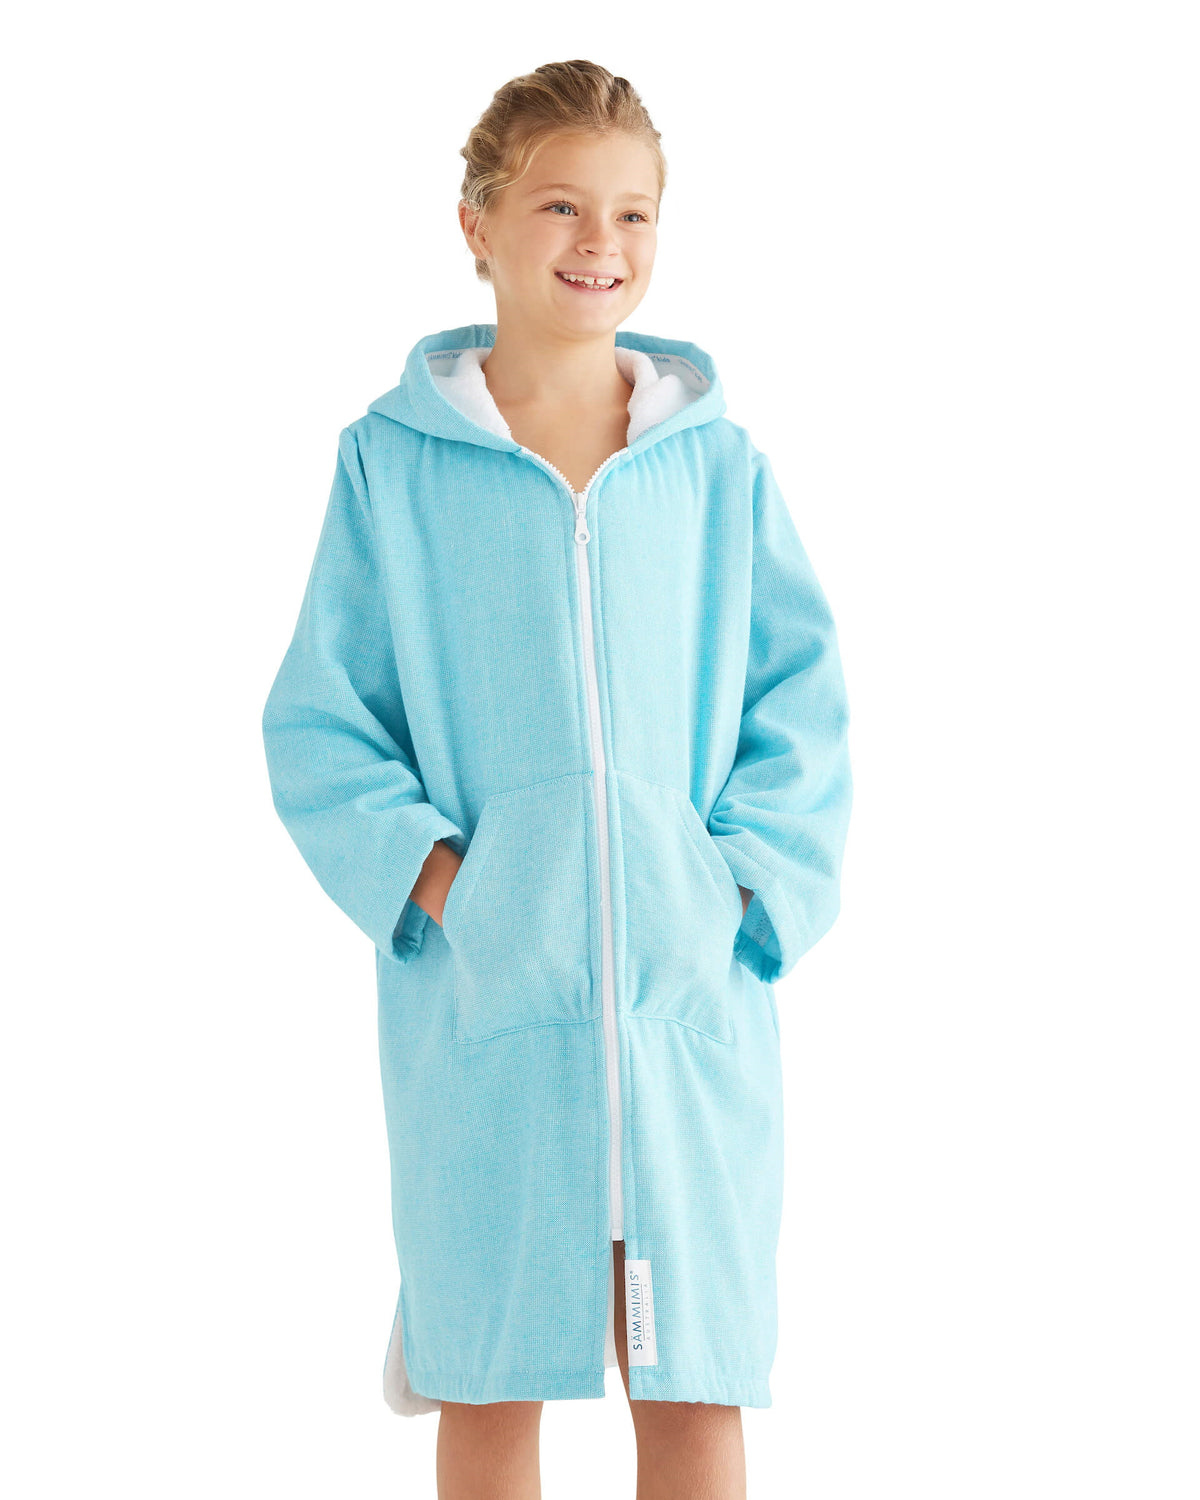 Hooded Towels | Hooded Towels for the Whole Family I SAMMIMIS